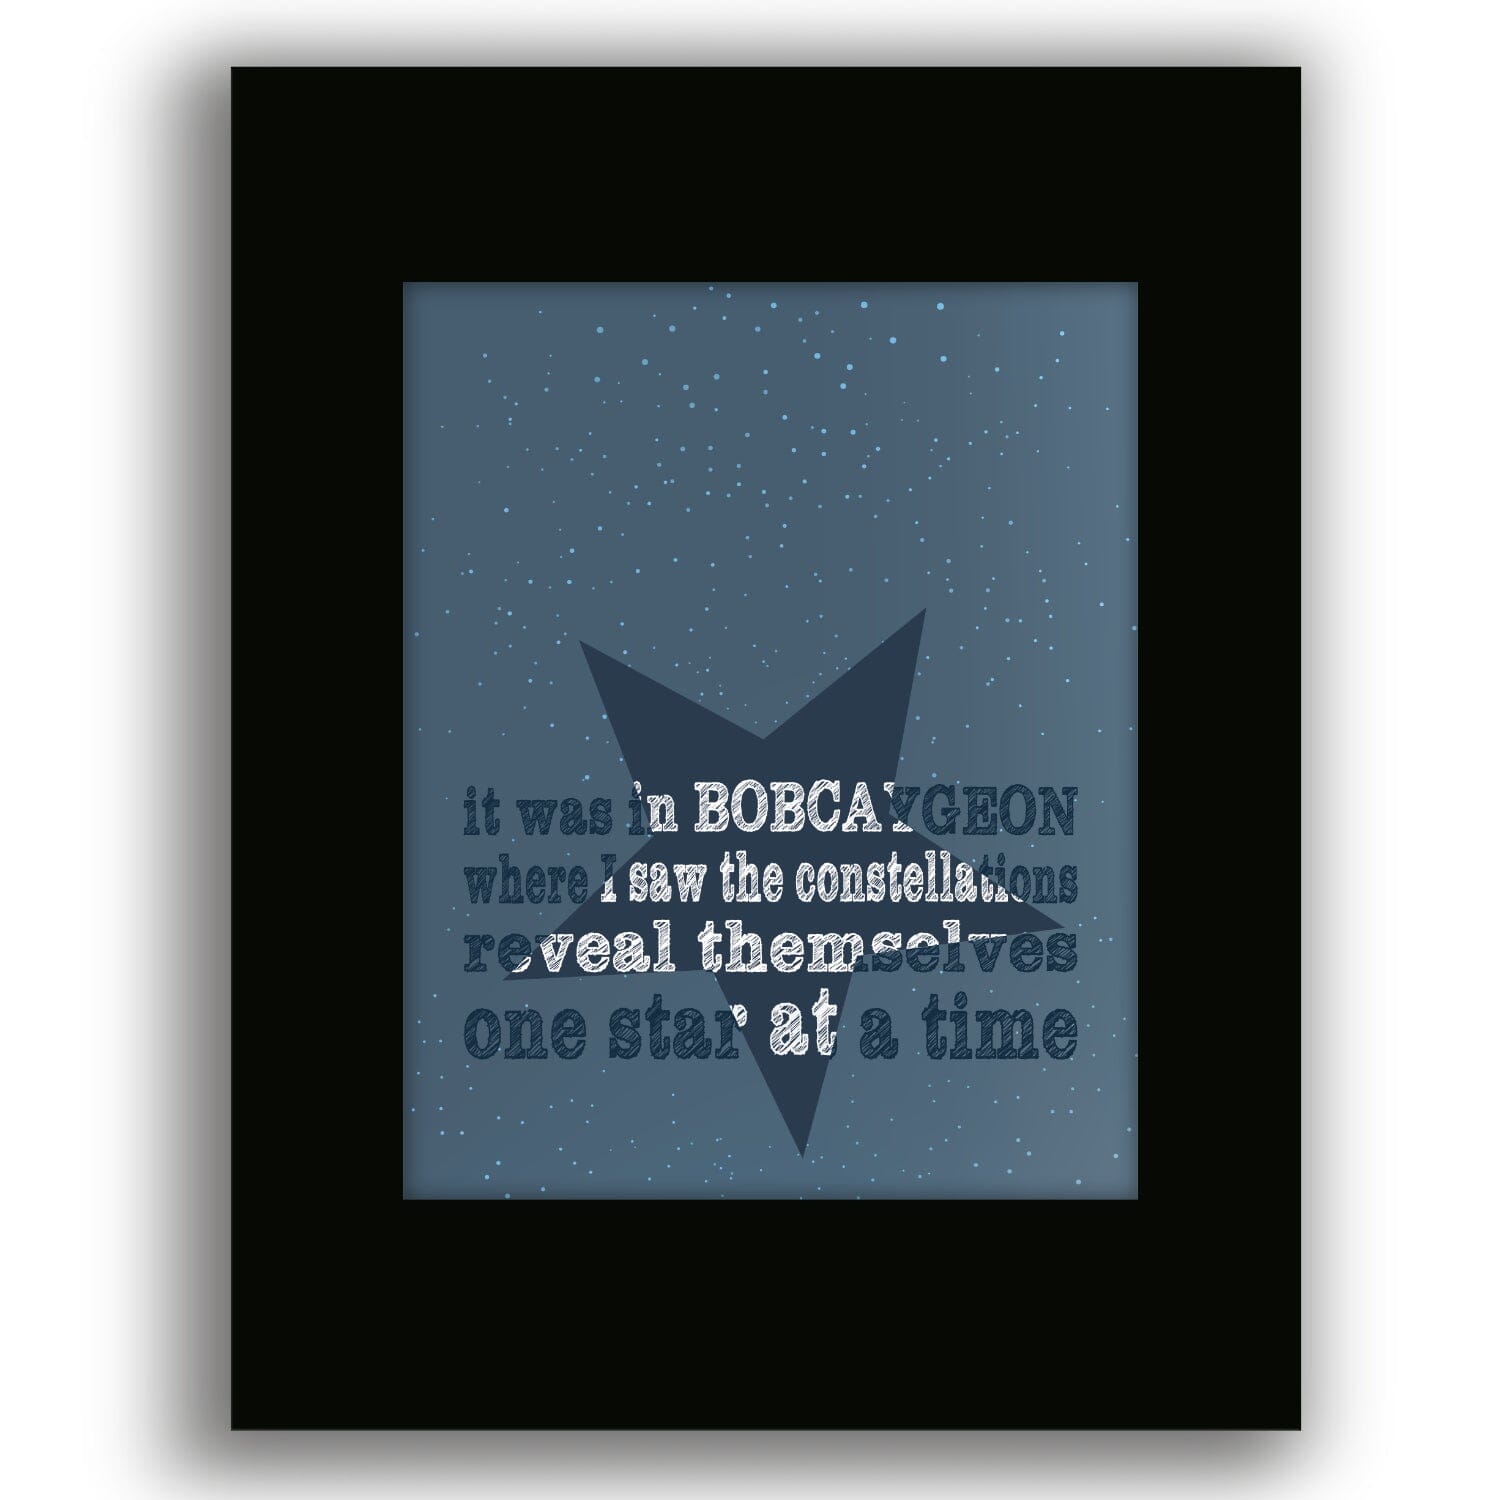 Bobcaygeon by Tragically Hip - Music Poster Song Lyric Art Song Lyrics Art Song Lyrics Art 8x10 Black Matted Print 